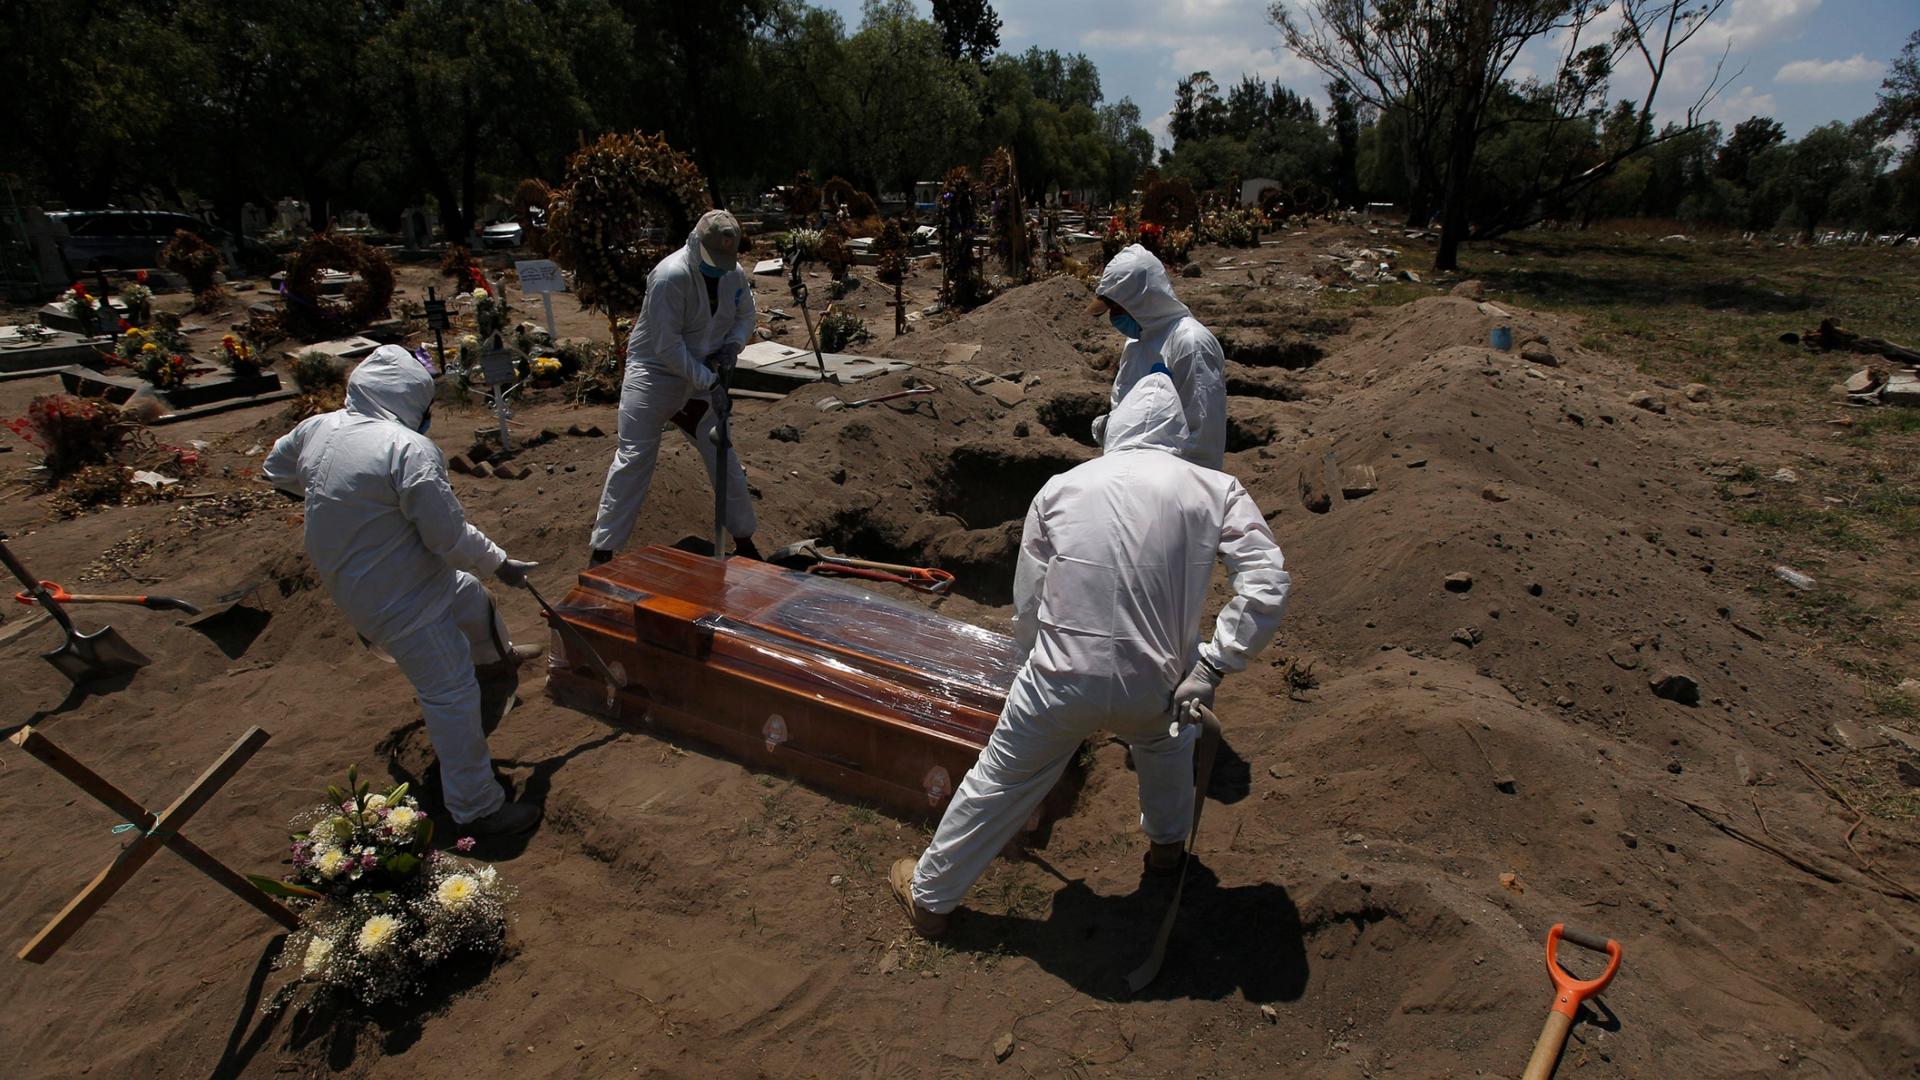 Four people are shown on holding ropes on each corner of a brown wooden coffin in a row with several dug out graves awaiting future burials.